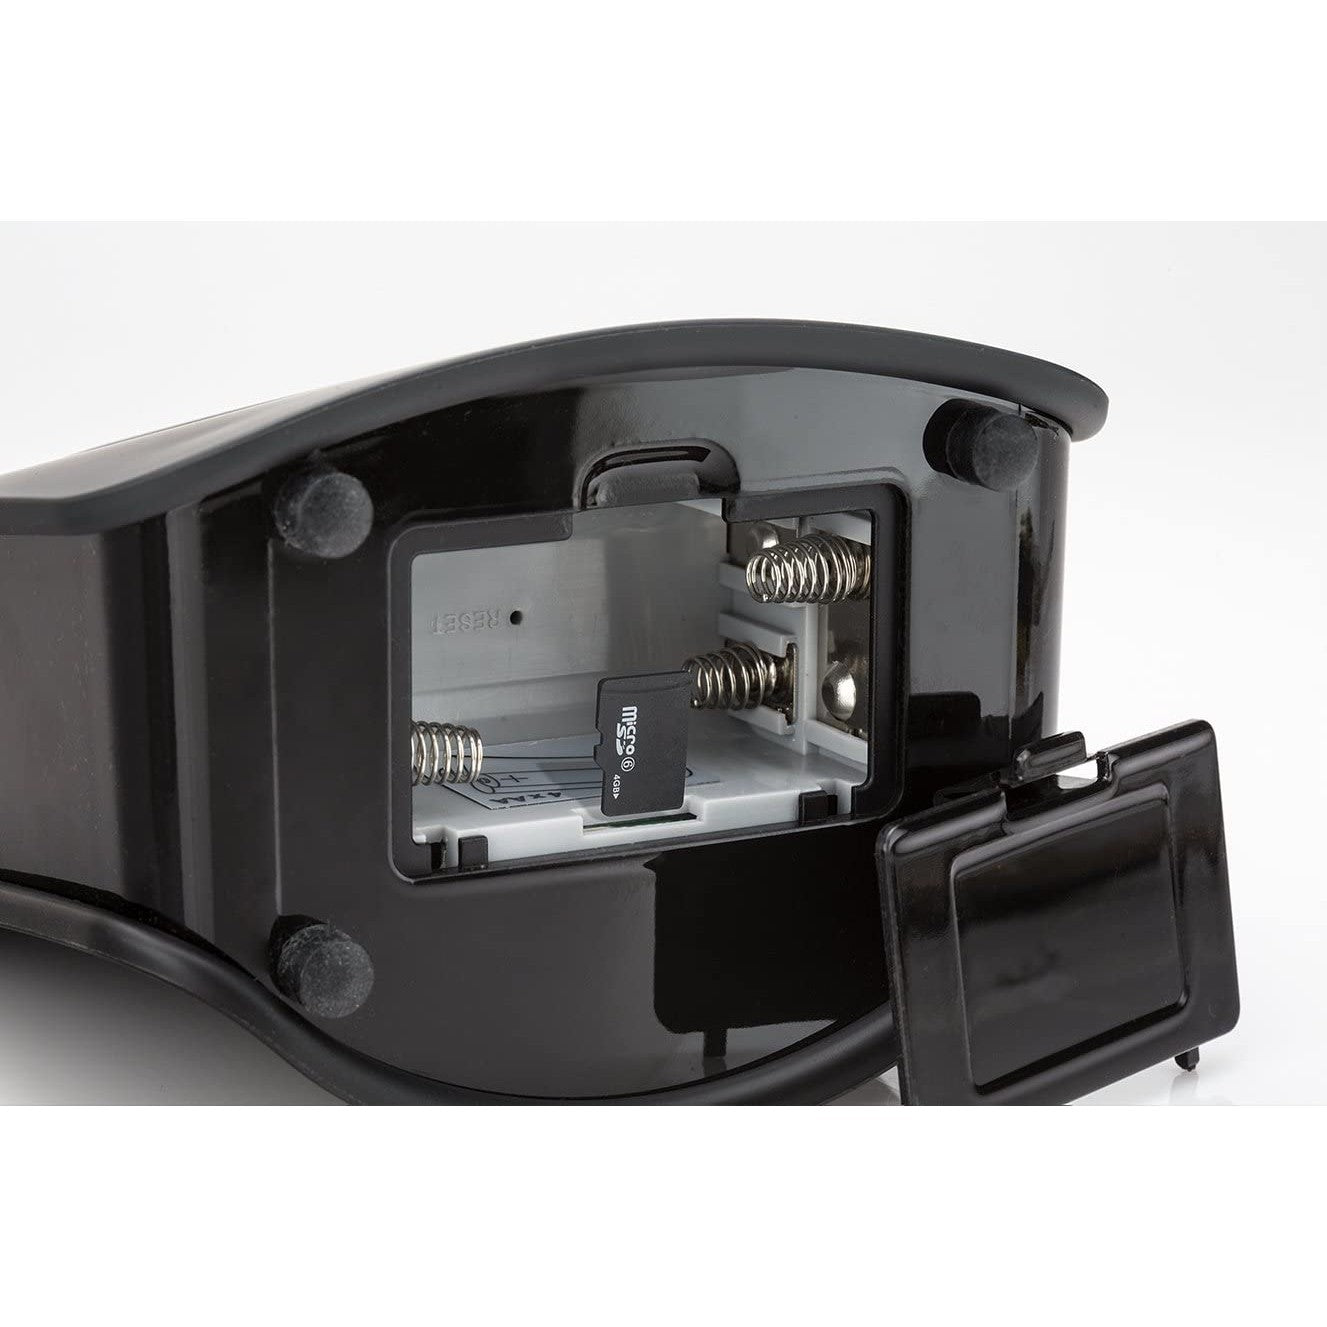 The battery compartment of a Sound Oasis Tinnitus Sound Therapy System.